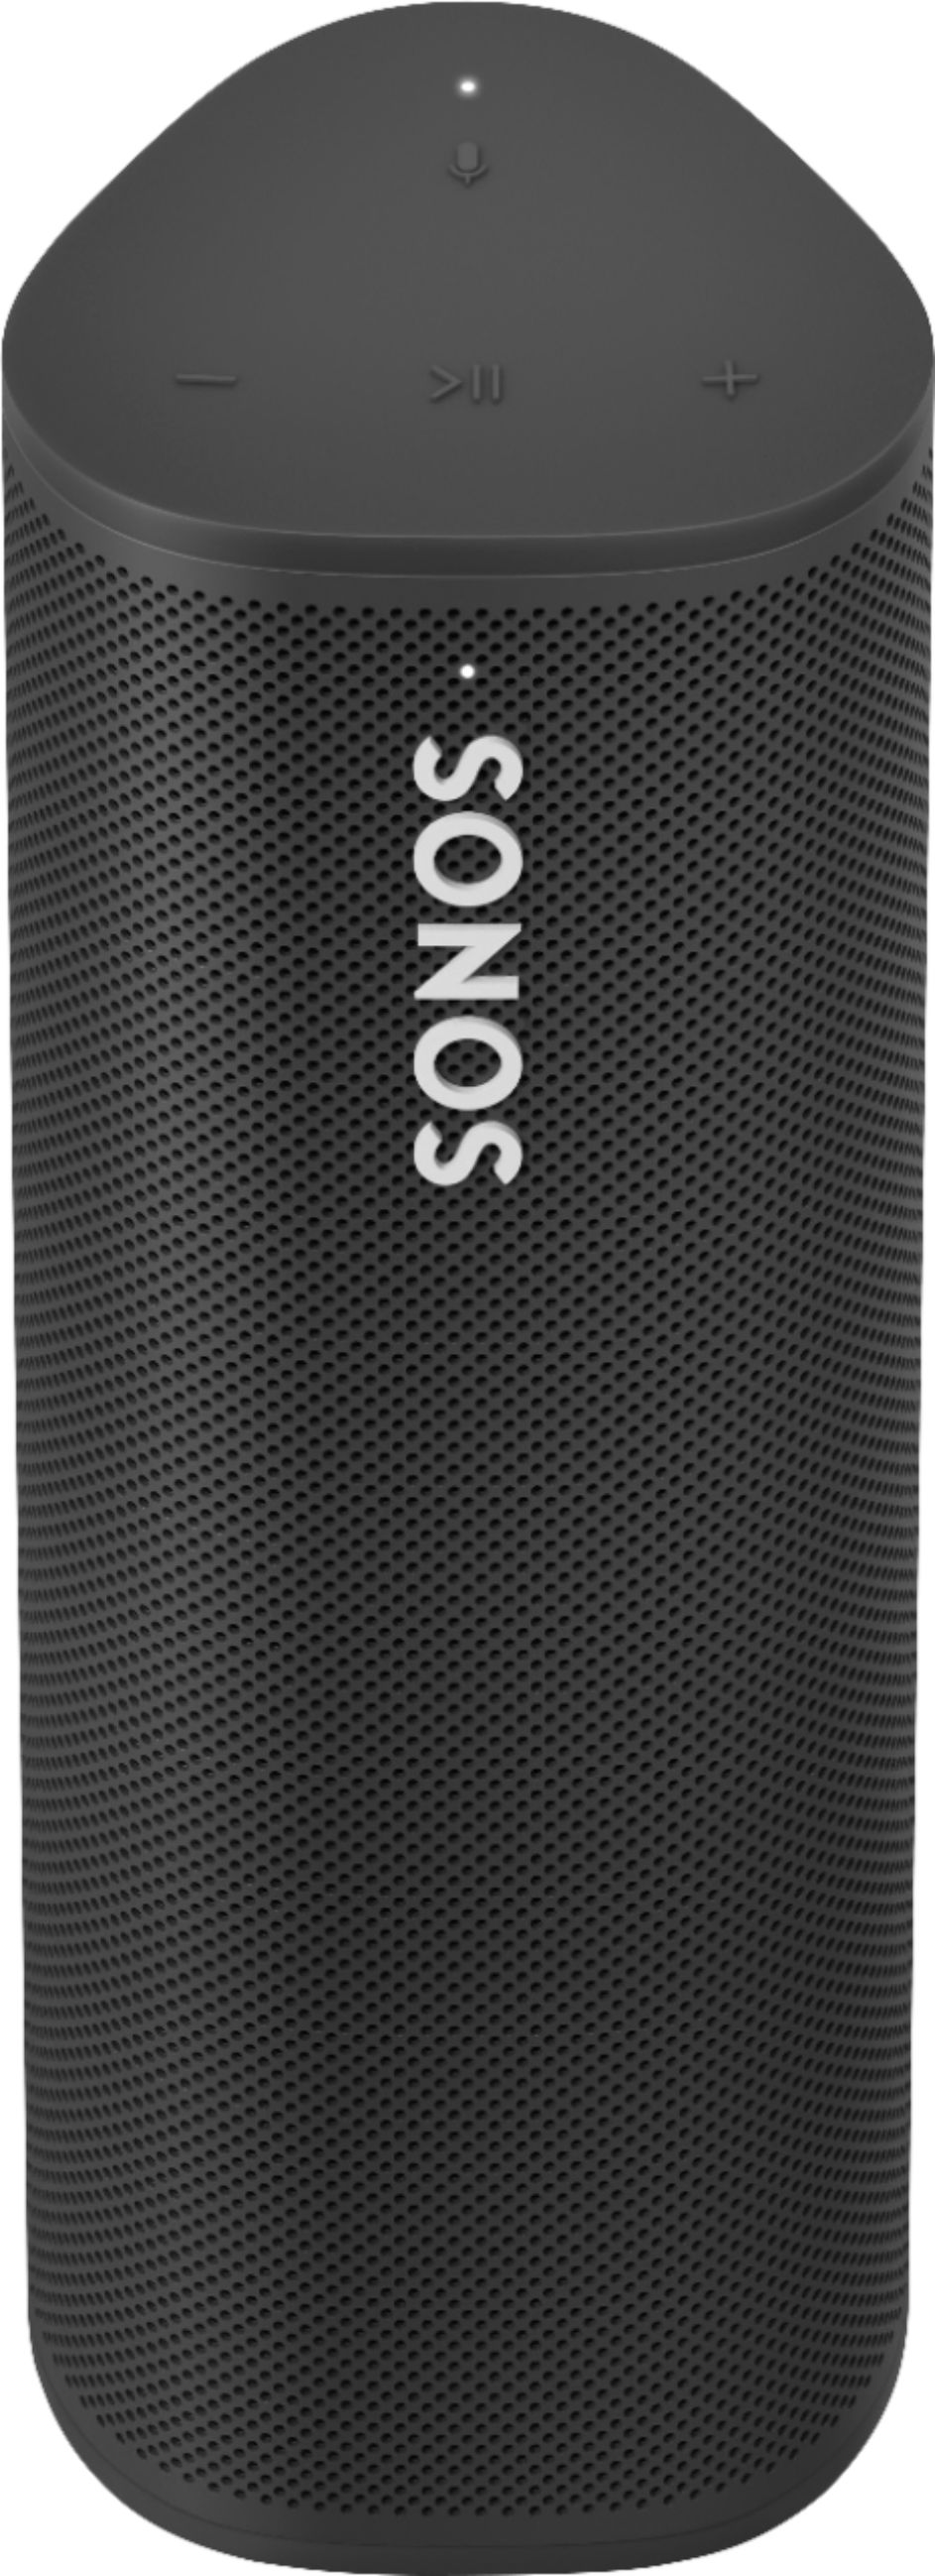 Sonos Roam Smart Portable Wi-Fi and Bluetooth Speaker with Amazon 